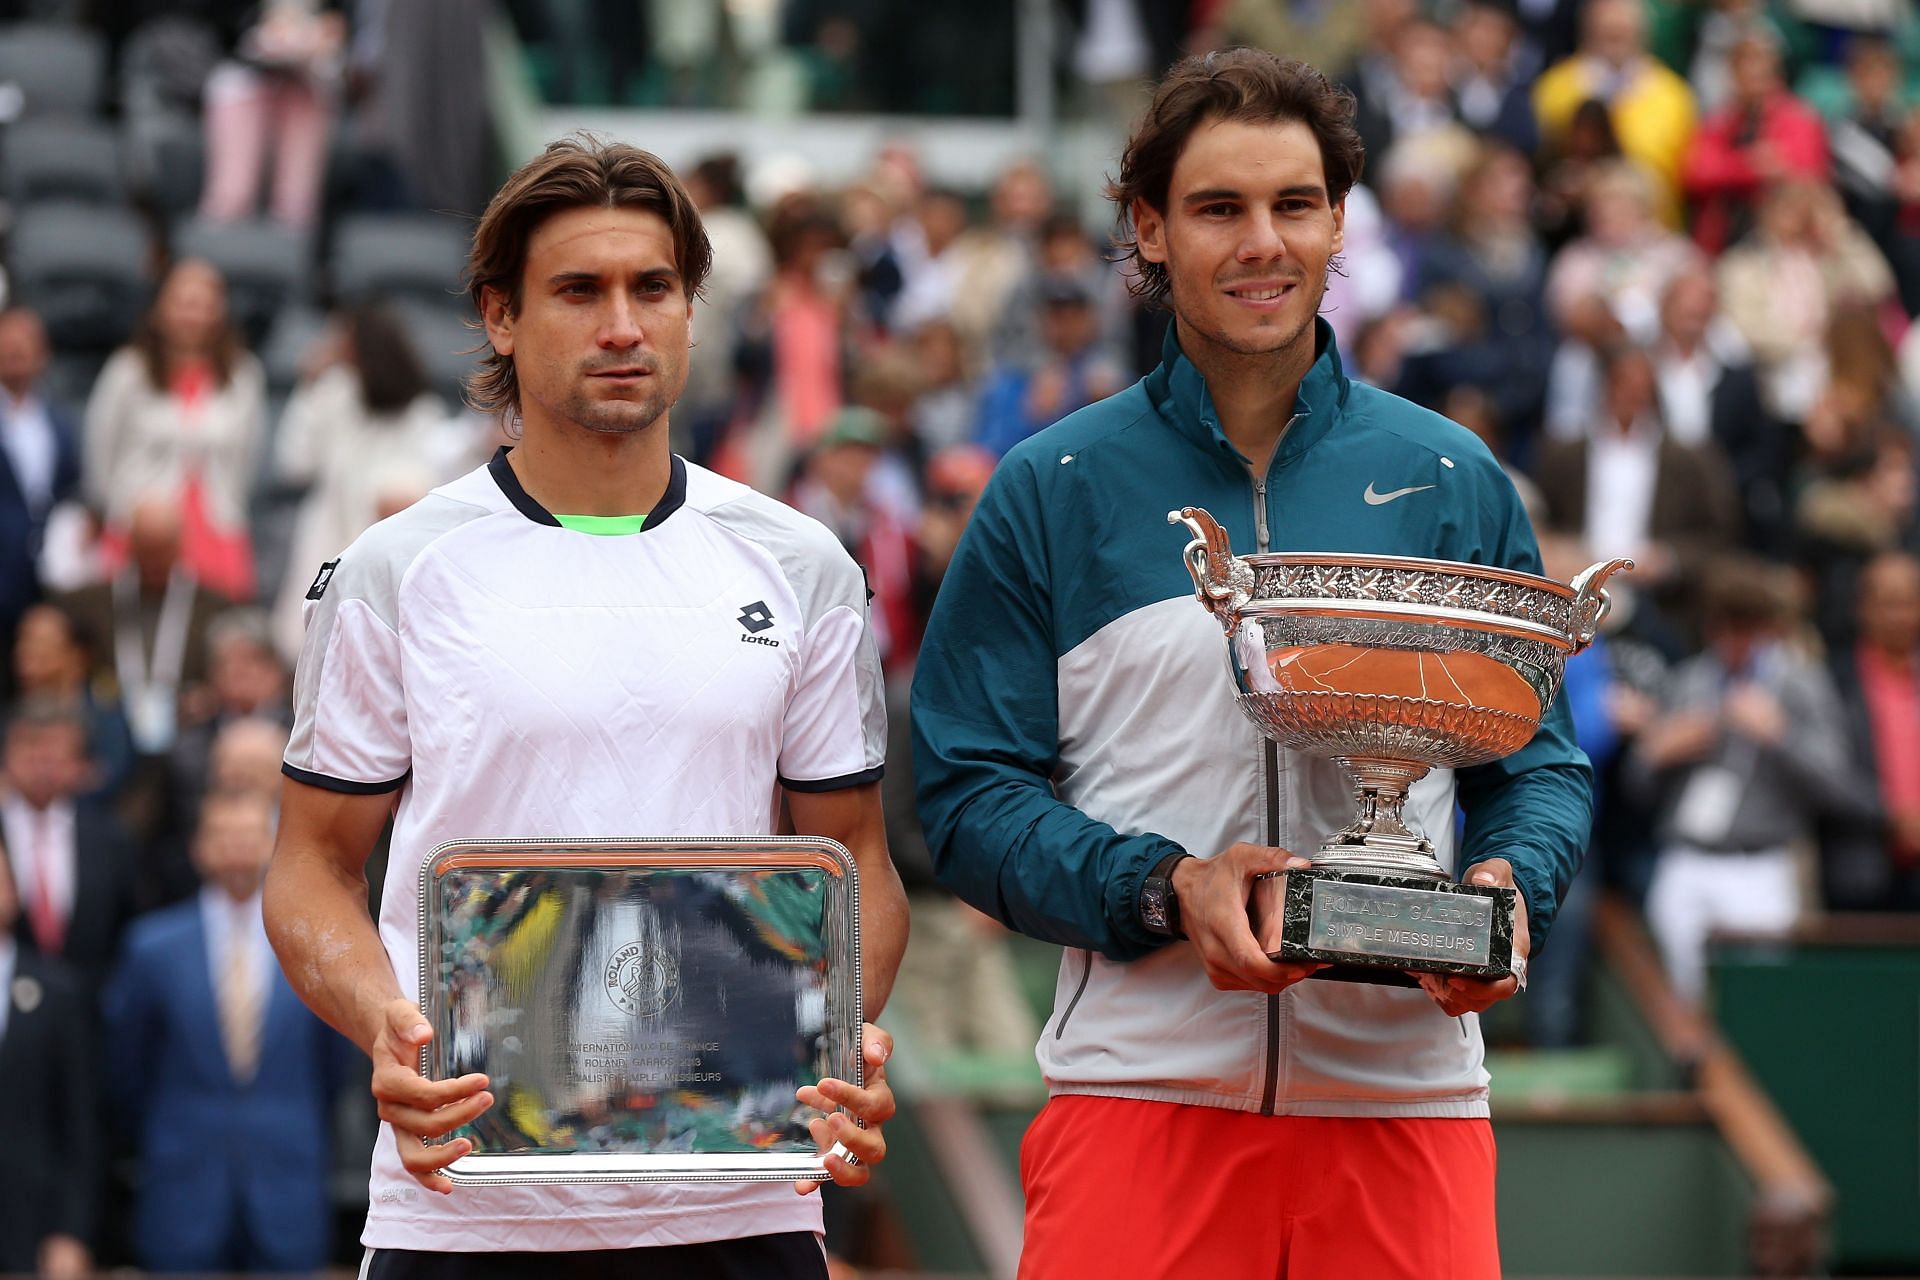 2013 French Open - Rafael Nadal and David Ferrer